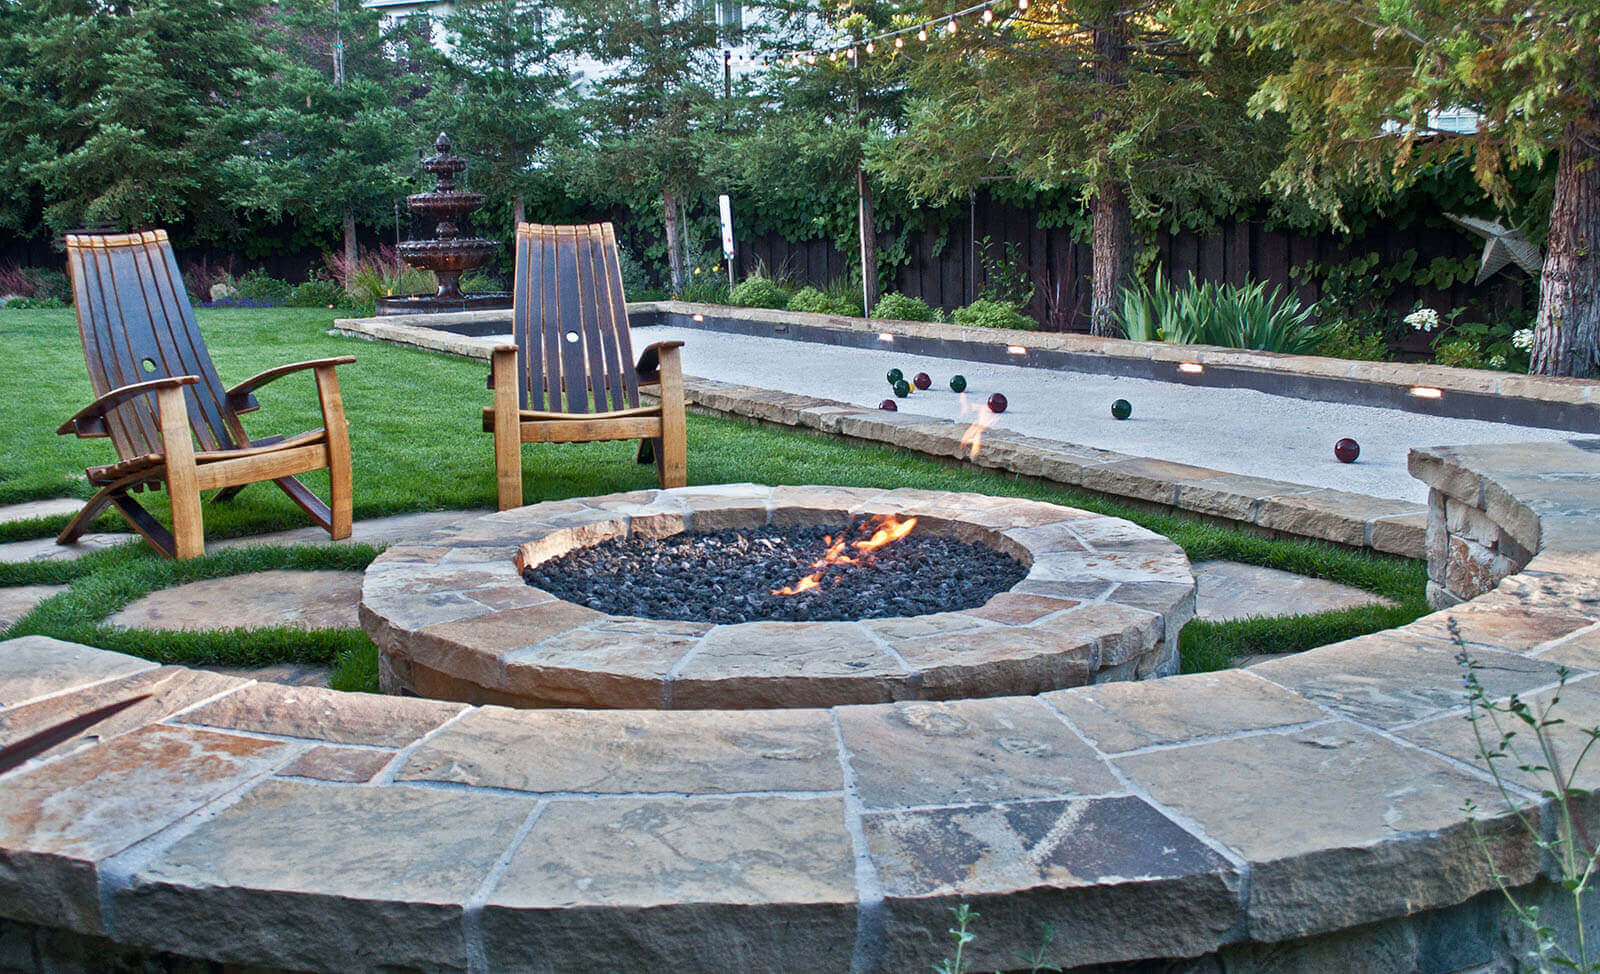 Rounded stone-lined river rock fireplace with rustic wooden lawn chairs and stone wrapped seating overlooking stone-lined lit bachi ball court